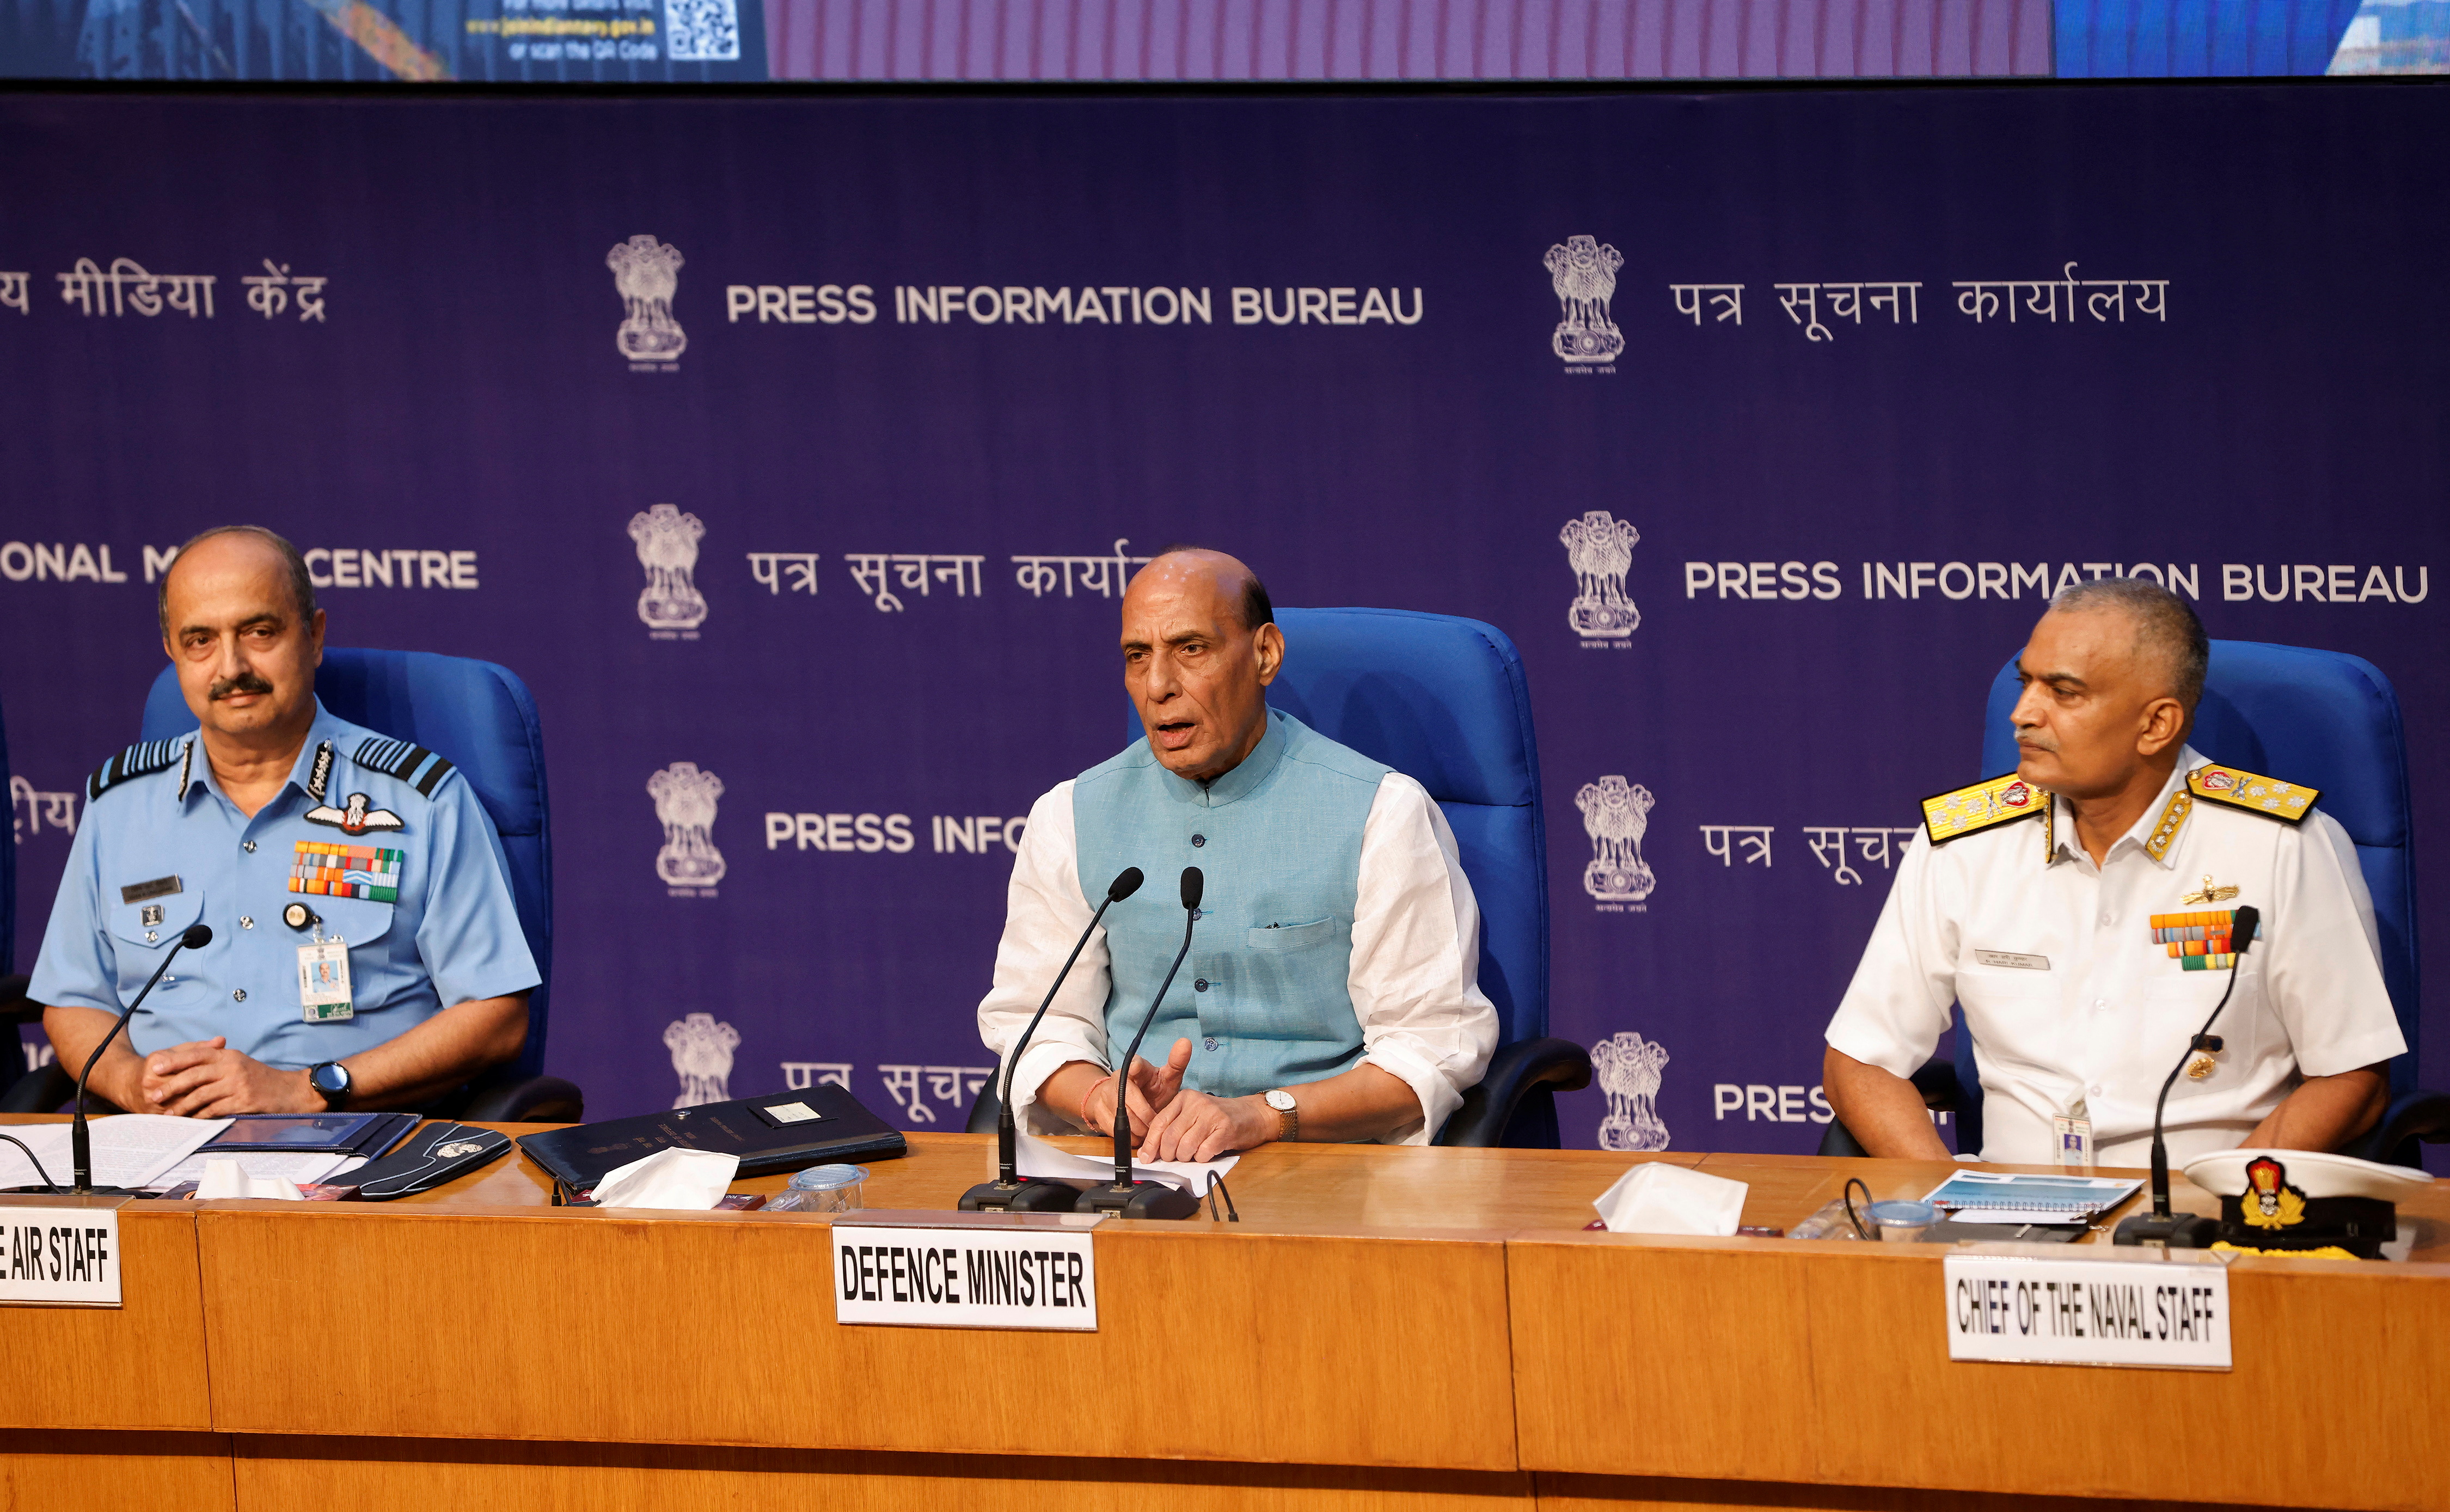 Indian Defence Minister Rajnath Singh addresses a news conference as Indian Air Chief Marshal Vivek Ram Chaudhari and Chief of Naval Staff Admiral R. Hari Kumar listen, in New Delhi